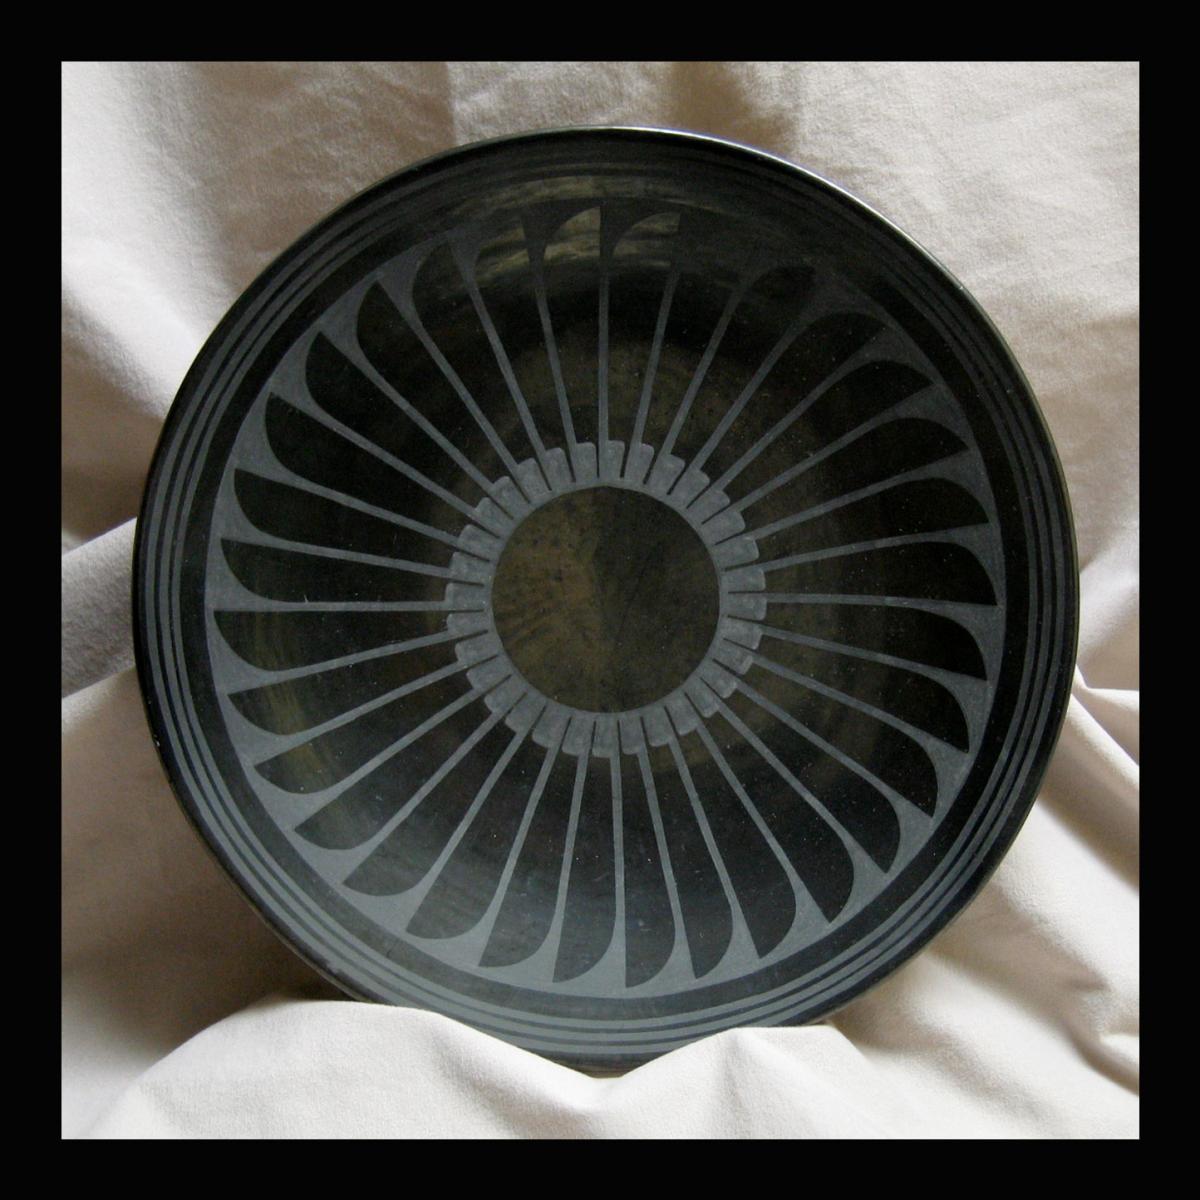 Radiating Feathers plate